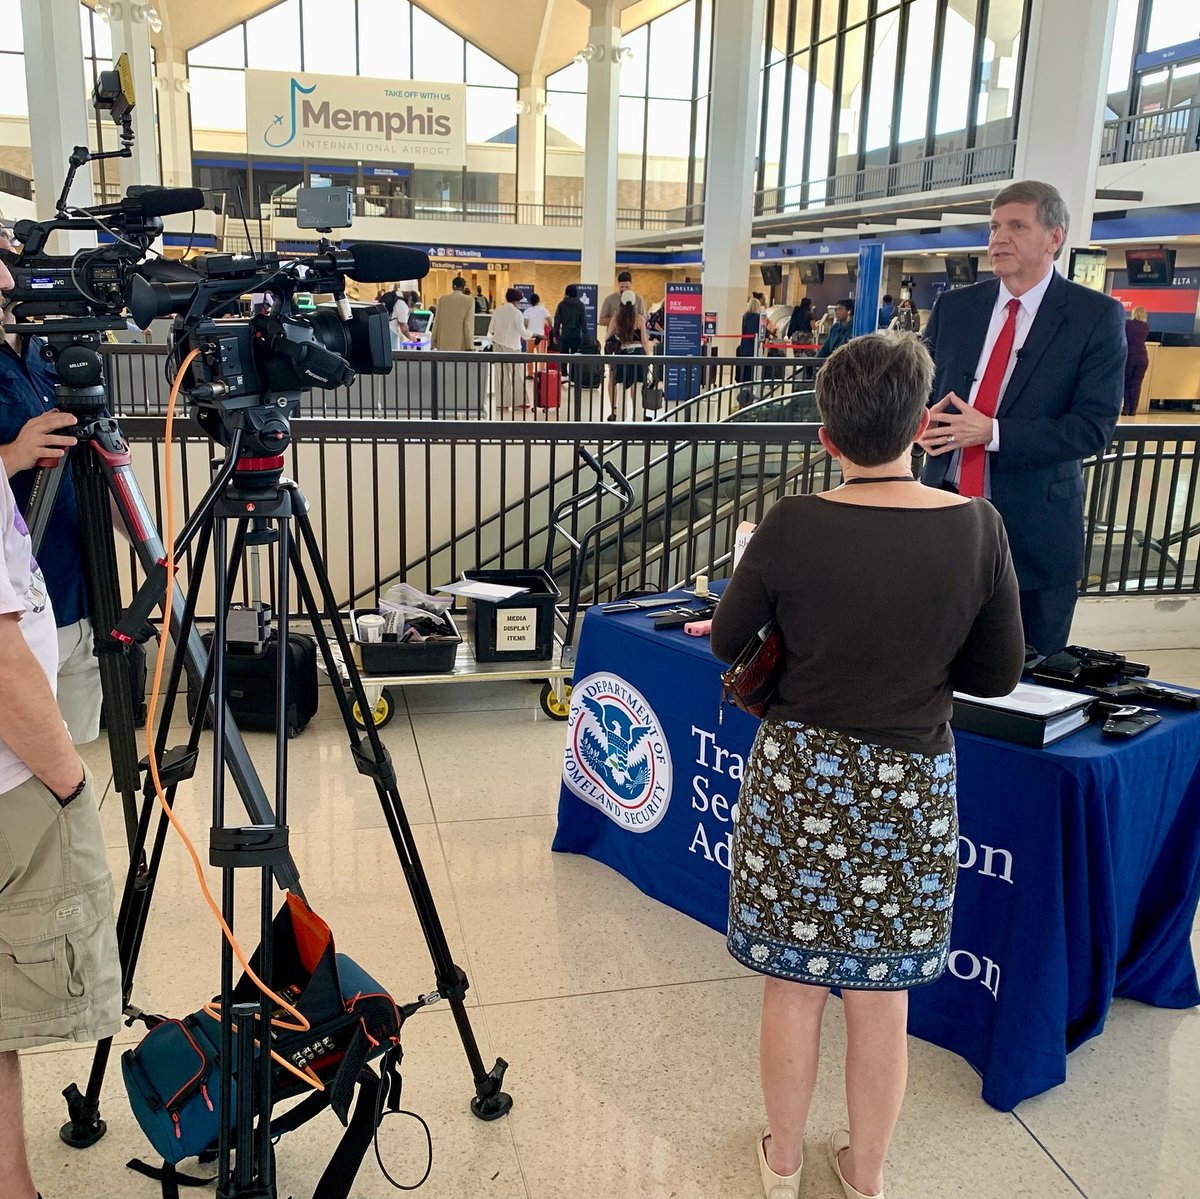 This morning, @TSA representatives Mark Howell & Kevin McCarthy demonstrated a variety of items caught at airport checkpoints by TSA’s watchful eyes. Avoid travel trouble by reviewing TSA’s “What Can I Bring” website: tsa.gov/travel/securit… @TSA_Southeast